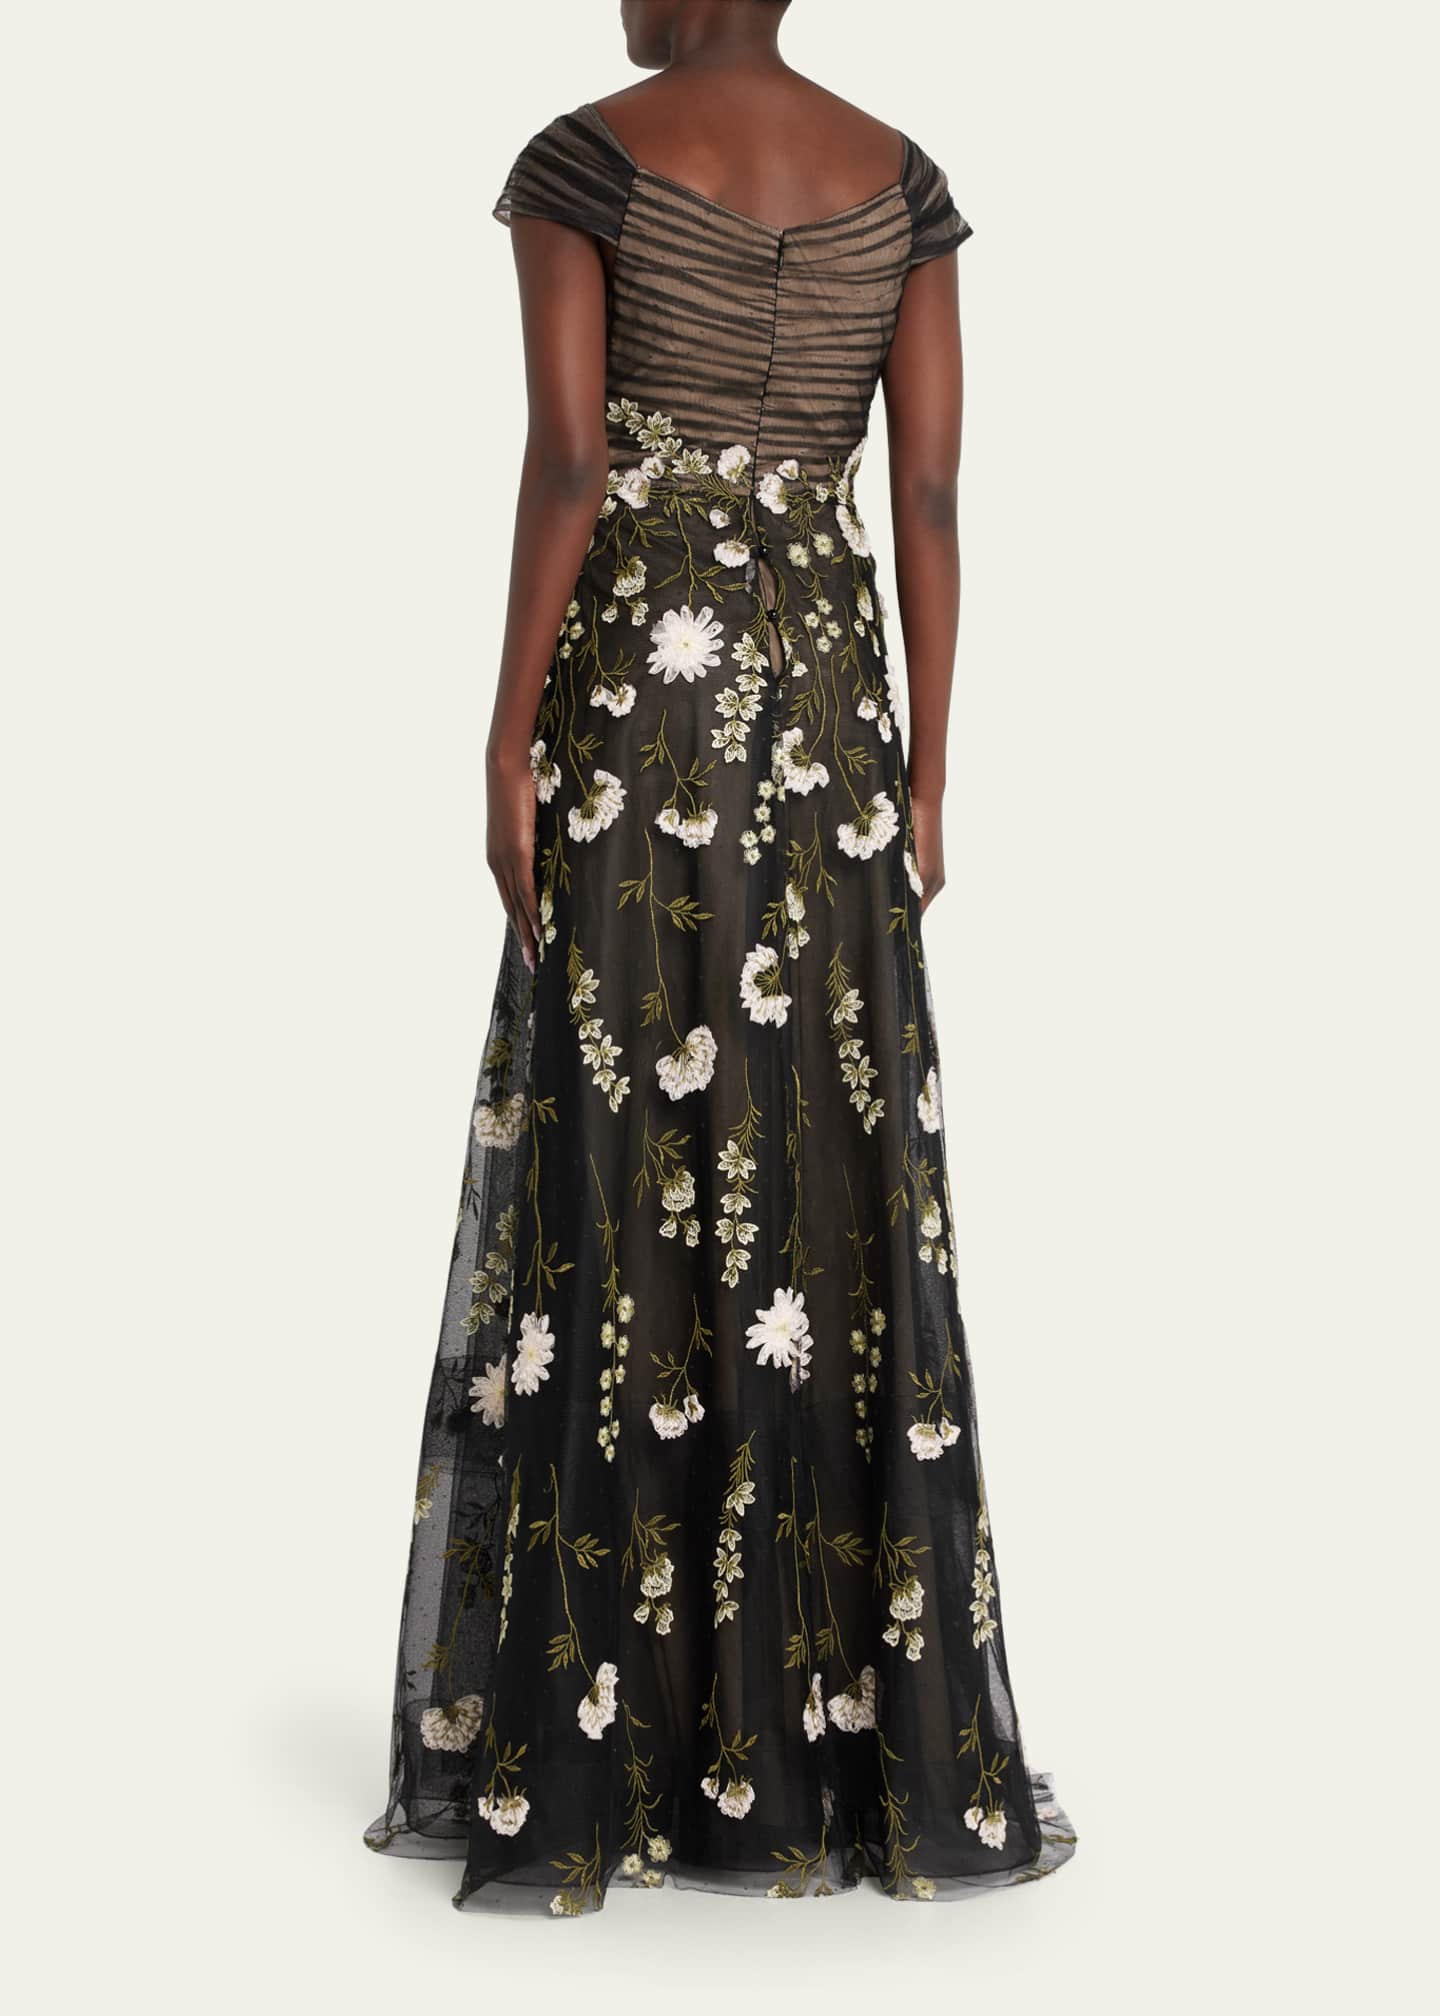 Rickie Freeman for Teri Jon Floral-Embroidered Sweetheart Tulle Gown ...